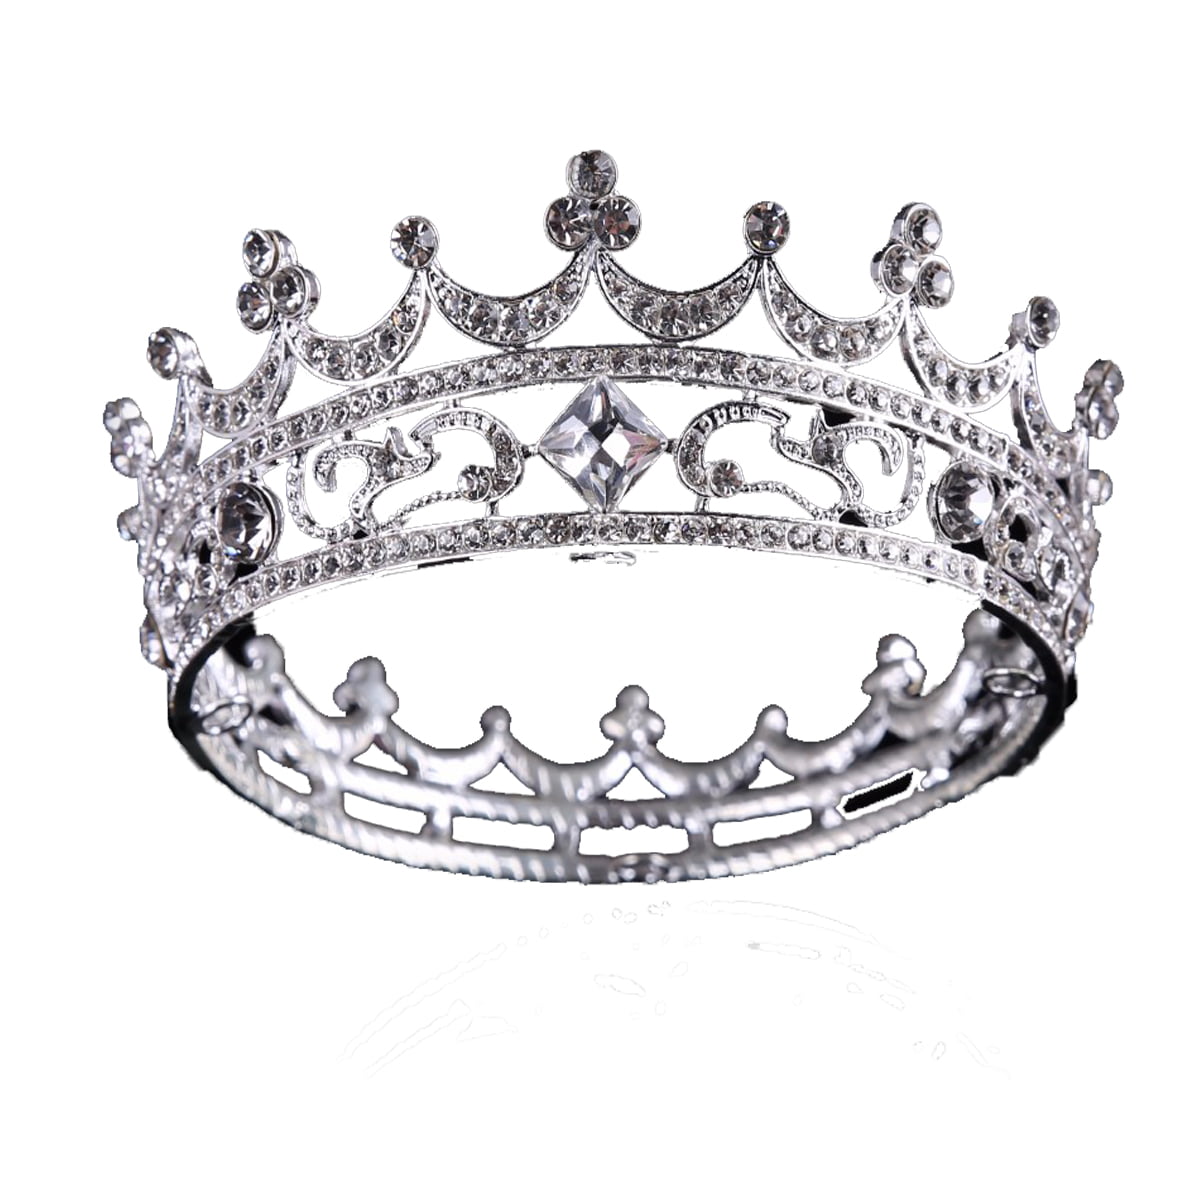 Large 7" Full Round Crown Beauty Pageant Tiara Crystal Headband Wedding Prom New 